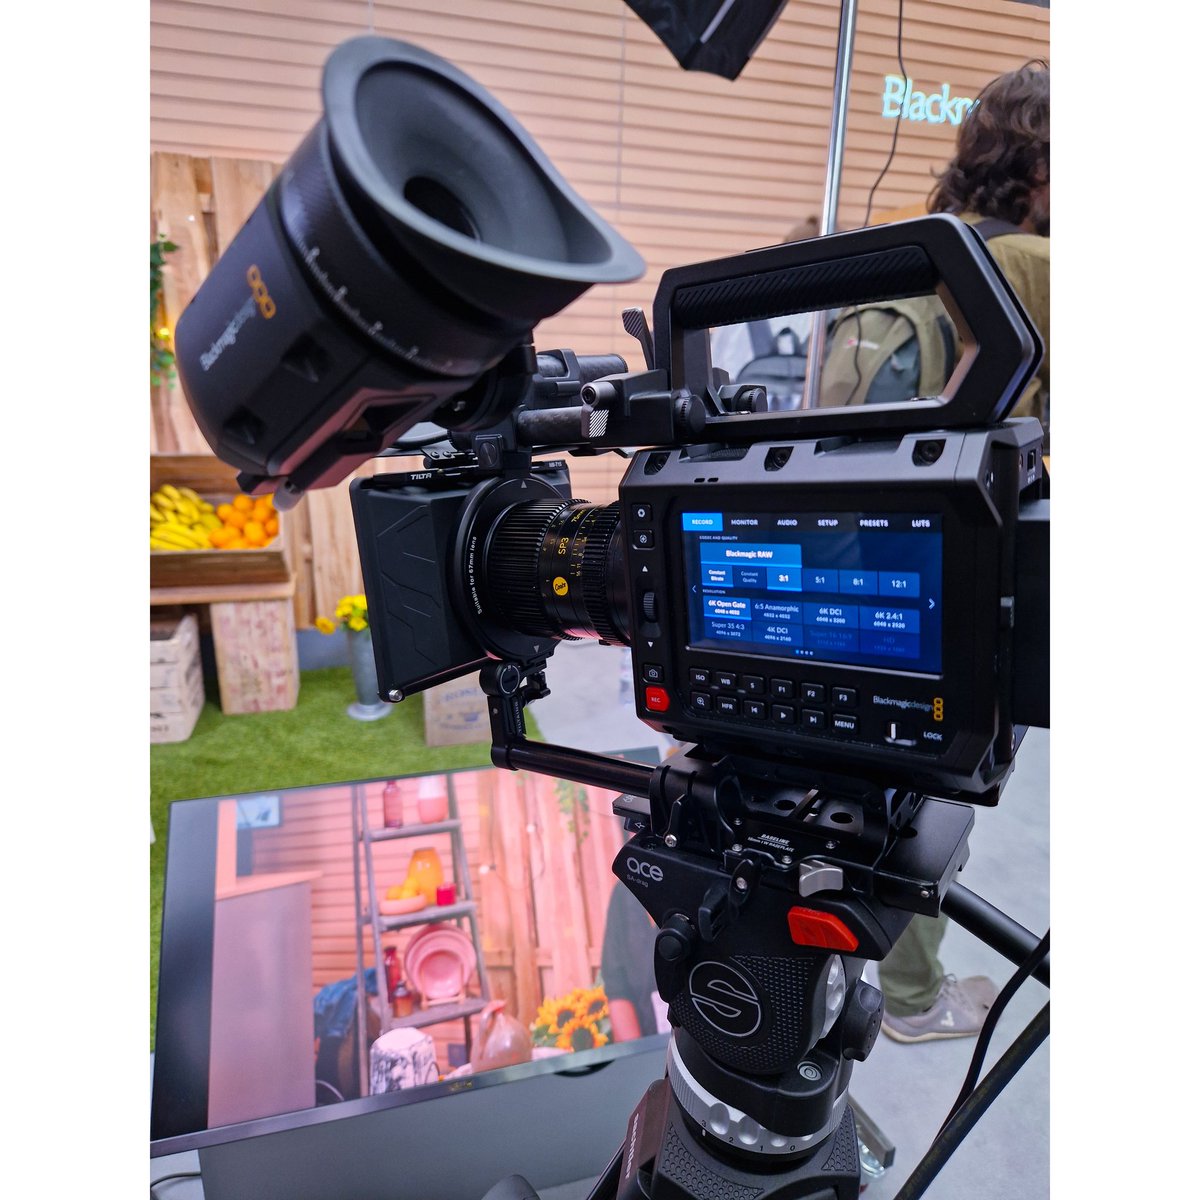 Team Cupsogue Pictures at the The Media Production & Technology Show in London. Getting hands-on with all the immersive technology available for the film and television industry. #MPTS2024 #Film #media #network #London